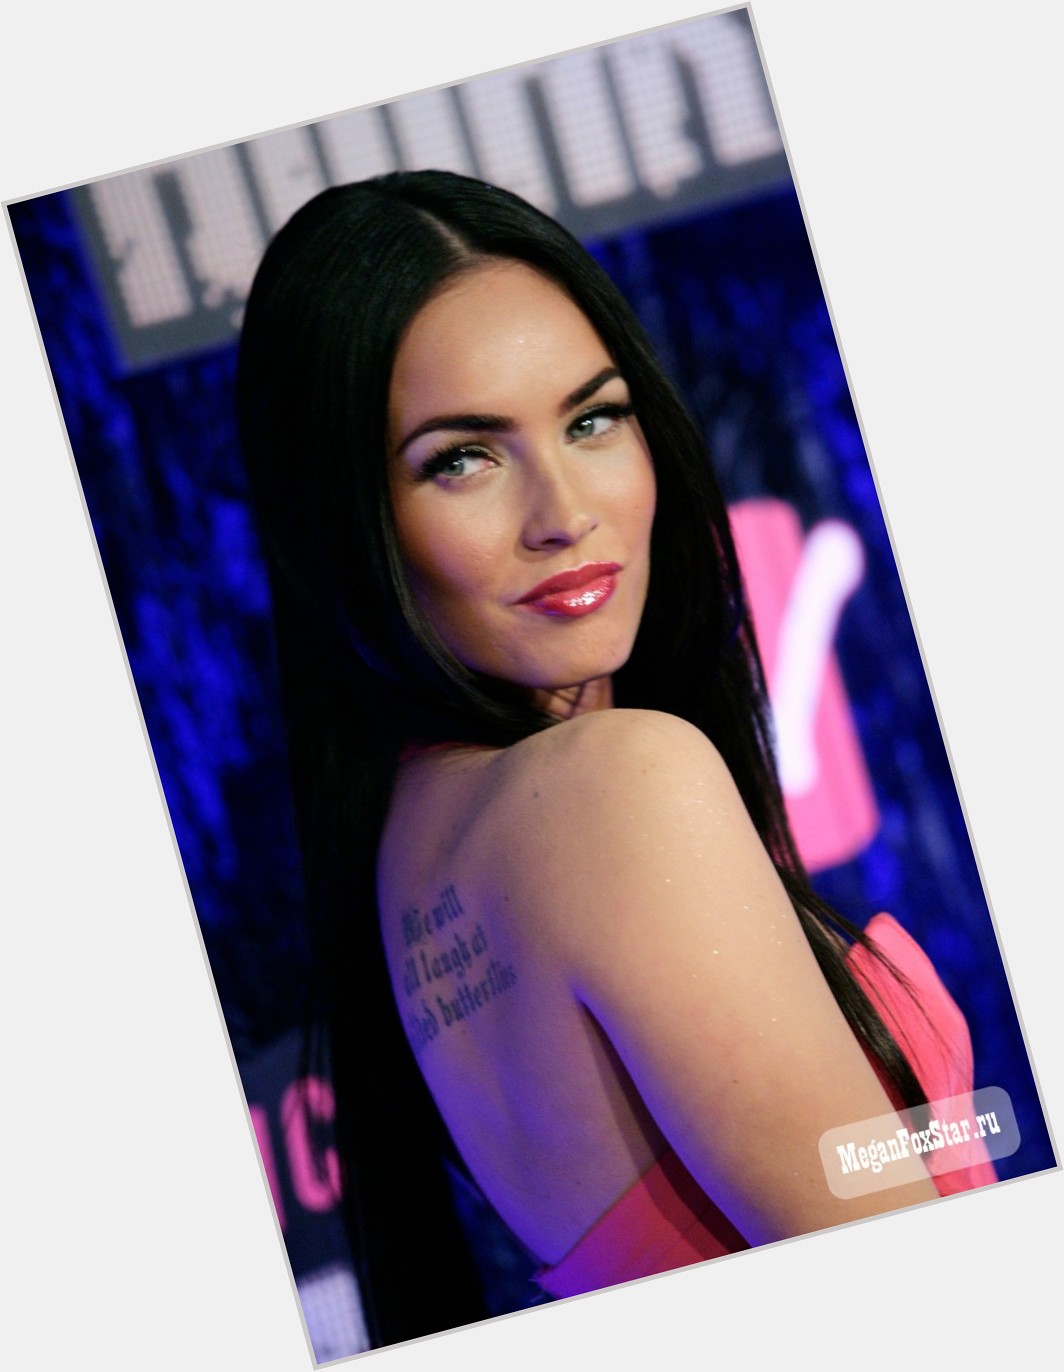 Today is Megan Fox Day. Happy 34th Birthday to this stunning and utterly gorgeous actress. 